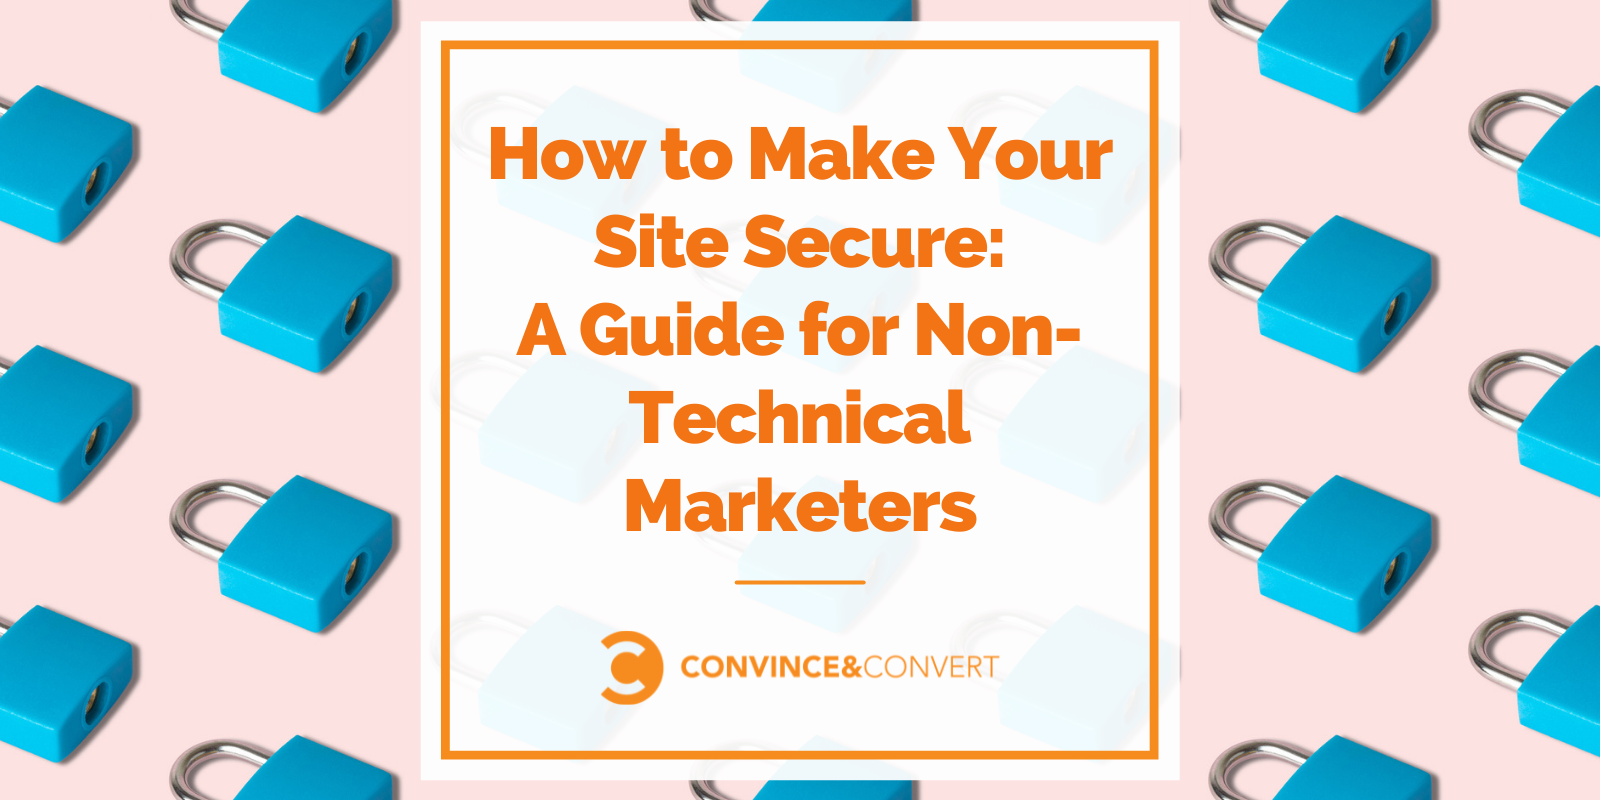 How to Make Your Site Secure: A Guide for Non-Technical Marketers